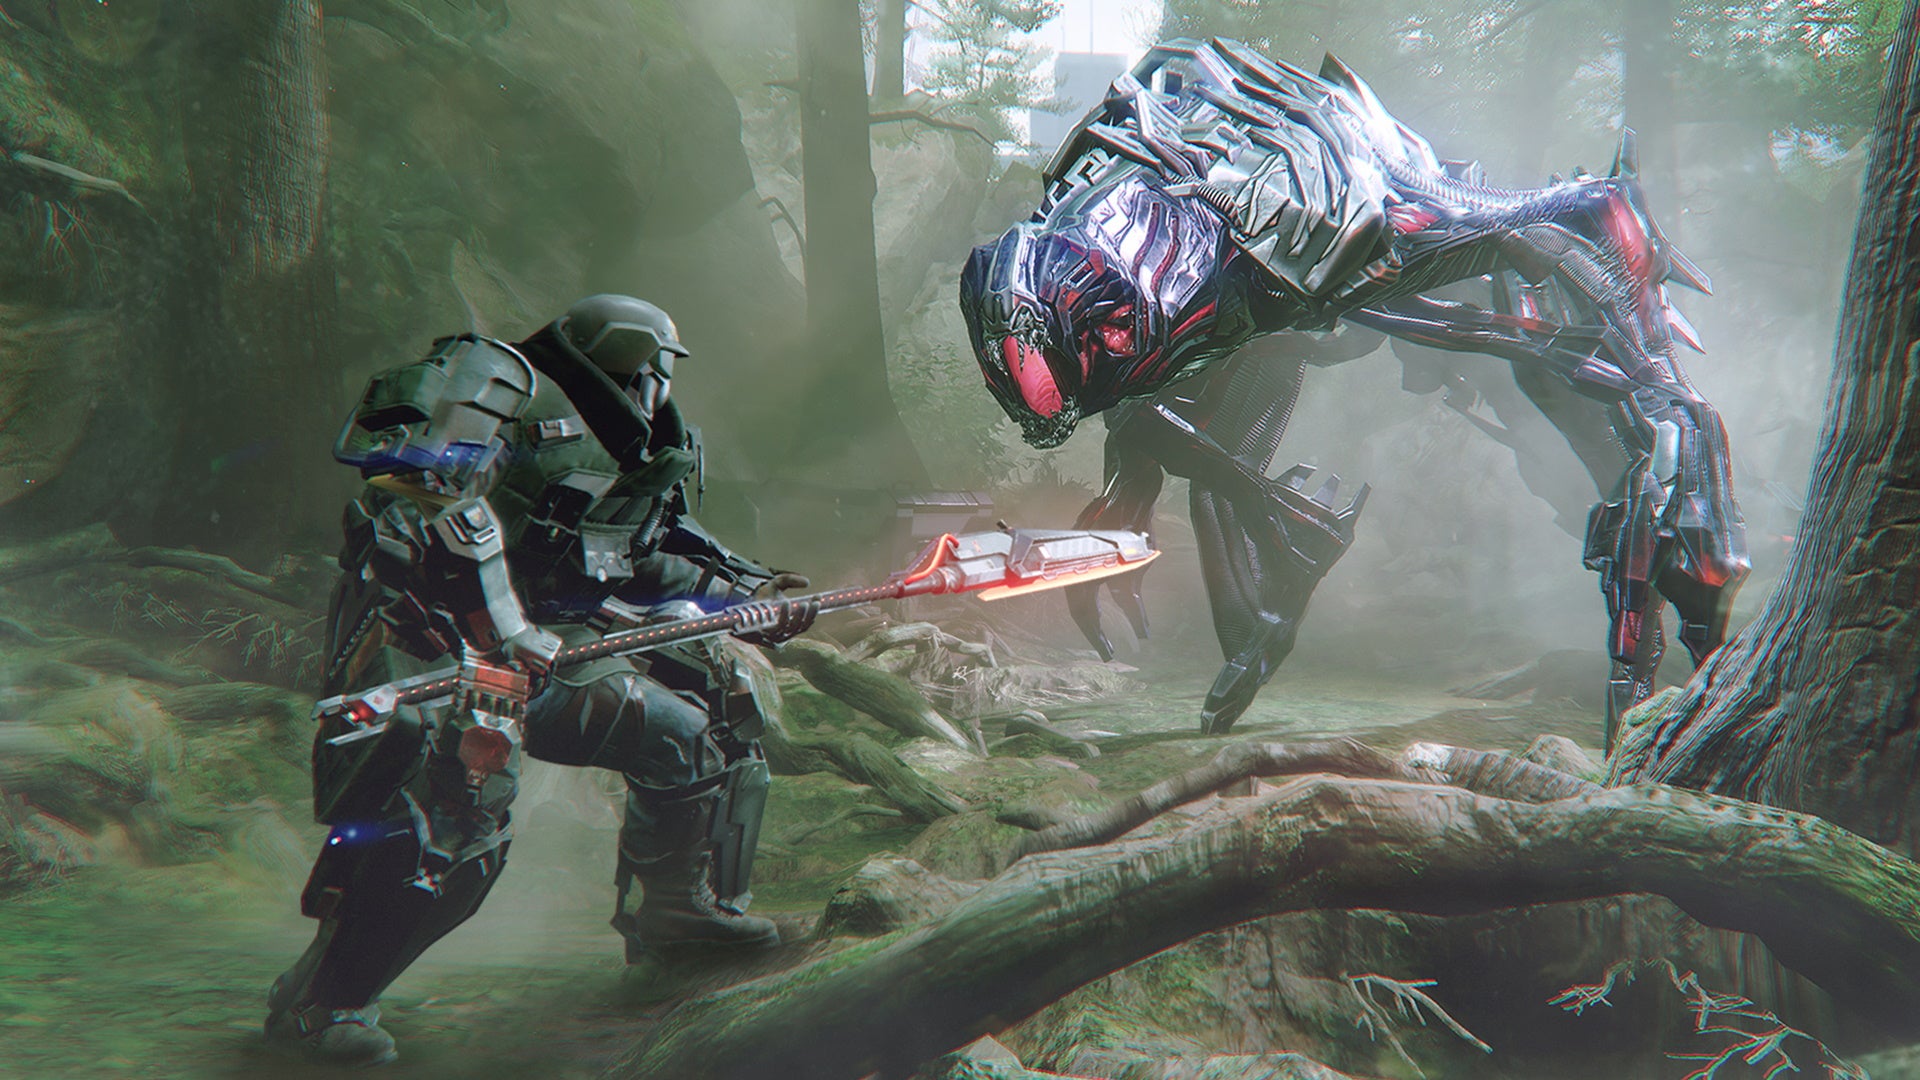 A player aims a spear at a robo-dog-thing in The Surge 2.